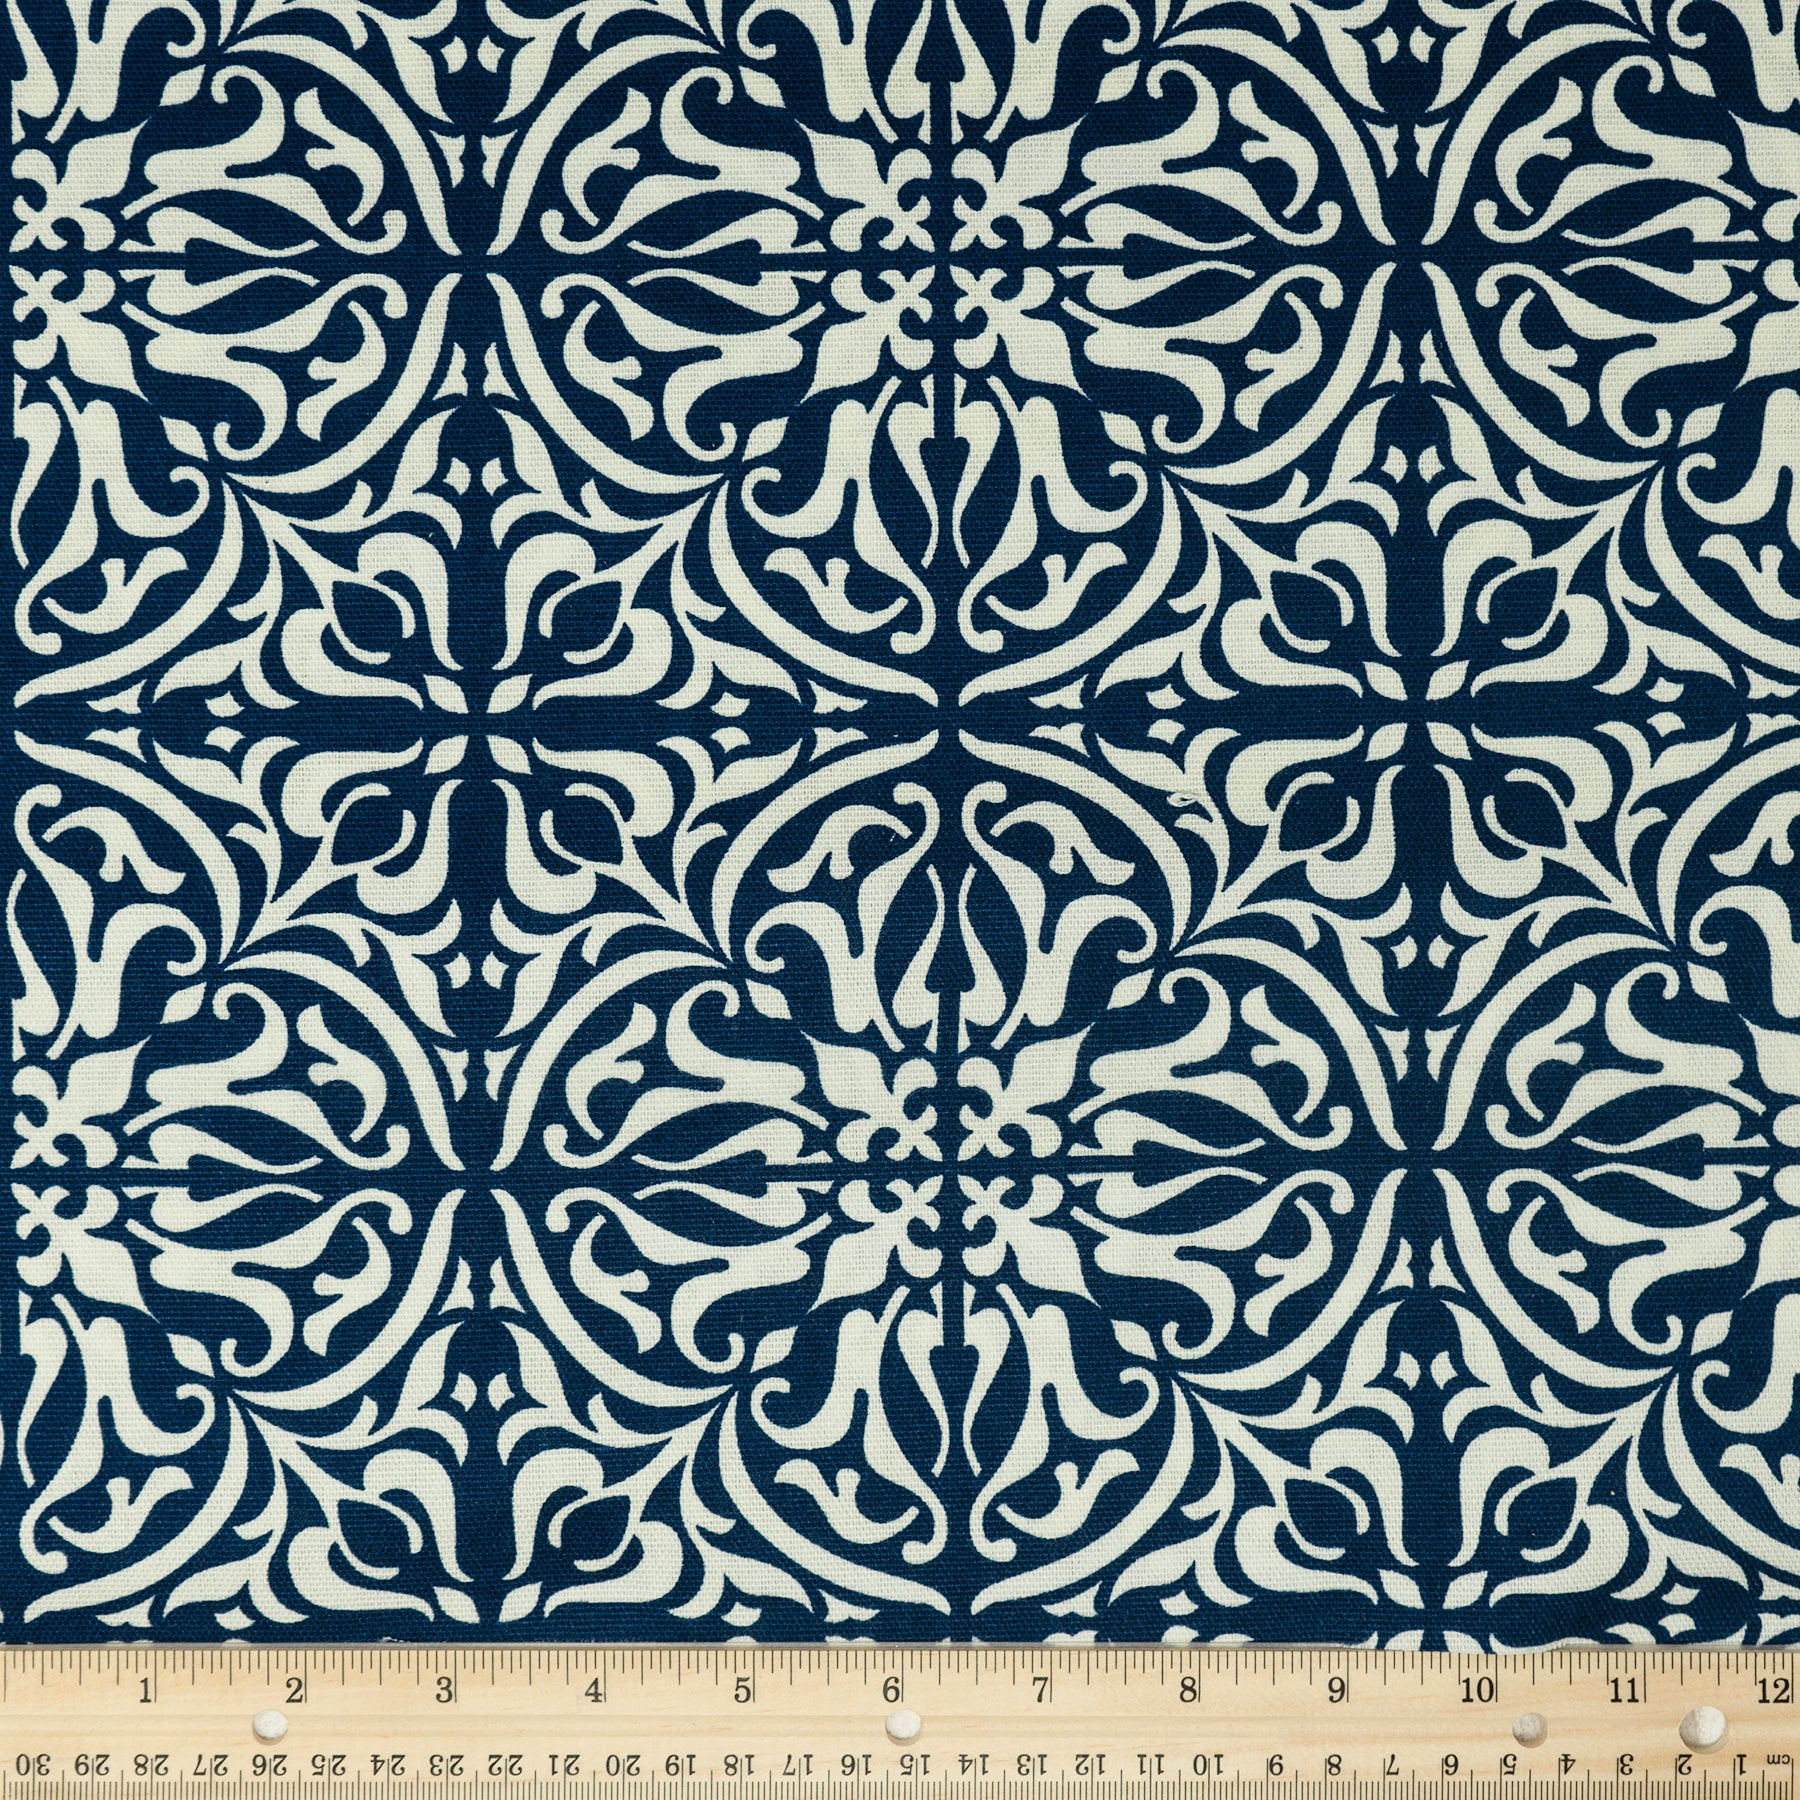 Waverly Inspirations 100% Cotton Duck 45" Width Tile Navy Color Sewing Fabric by the Yard